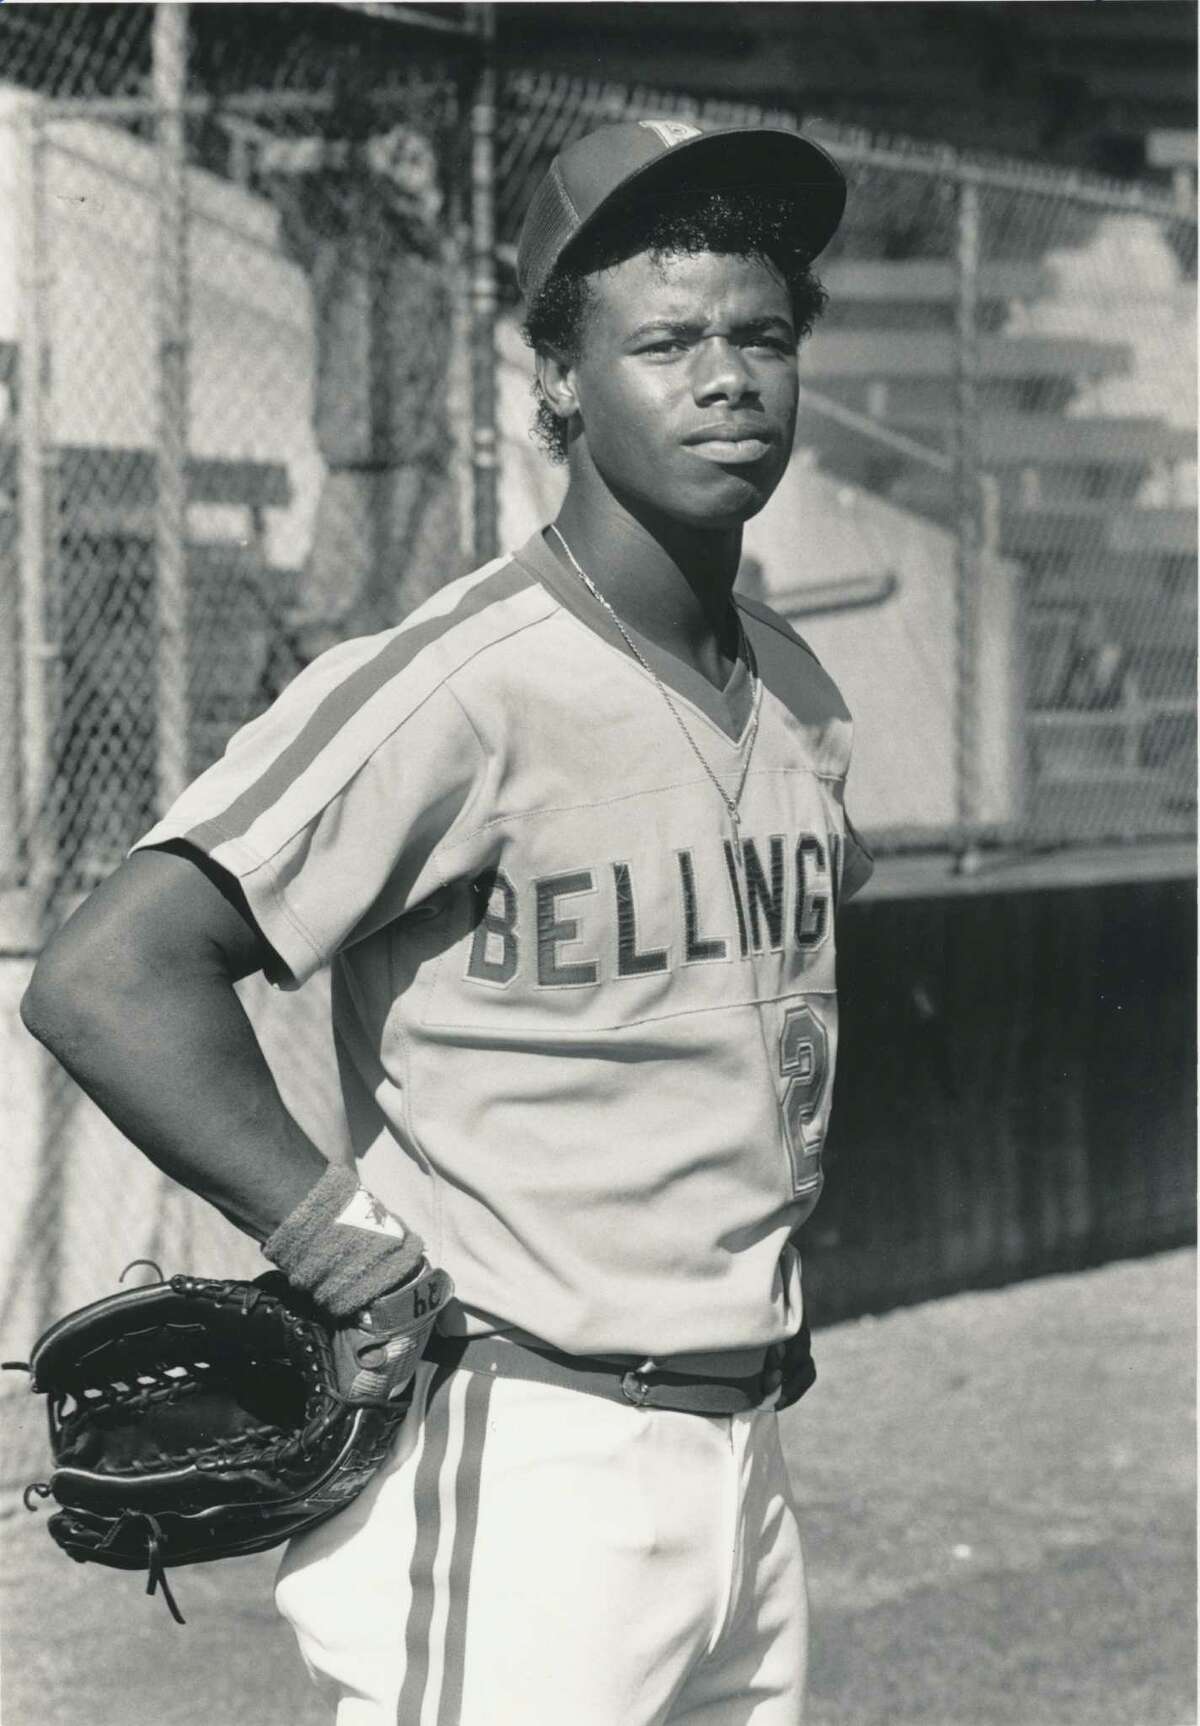 Original caption dated July 1, 1987: "BELLINGHAM, WA: Mariners' first round draft pick Ken Griffey during workouts 7/1." Seattle P-I Collection image number 2000.107.079.18.10